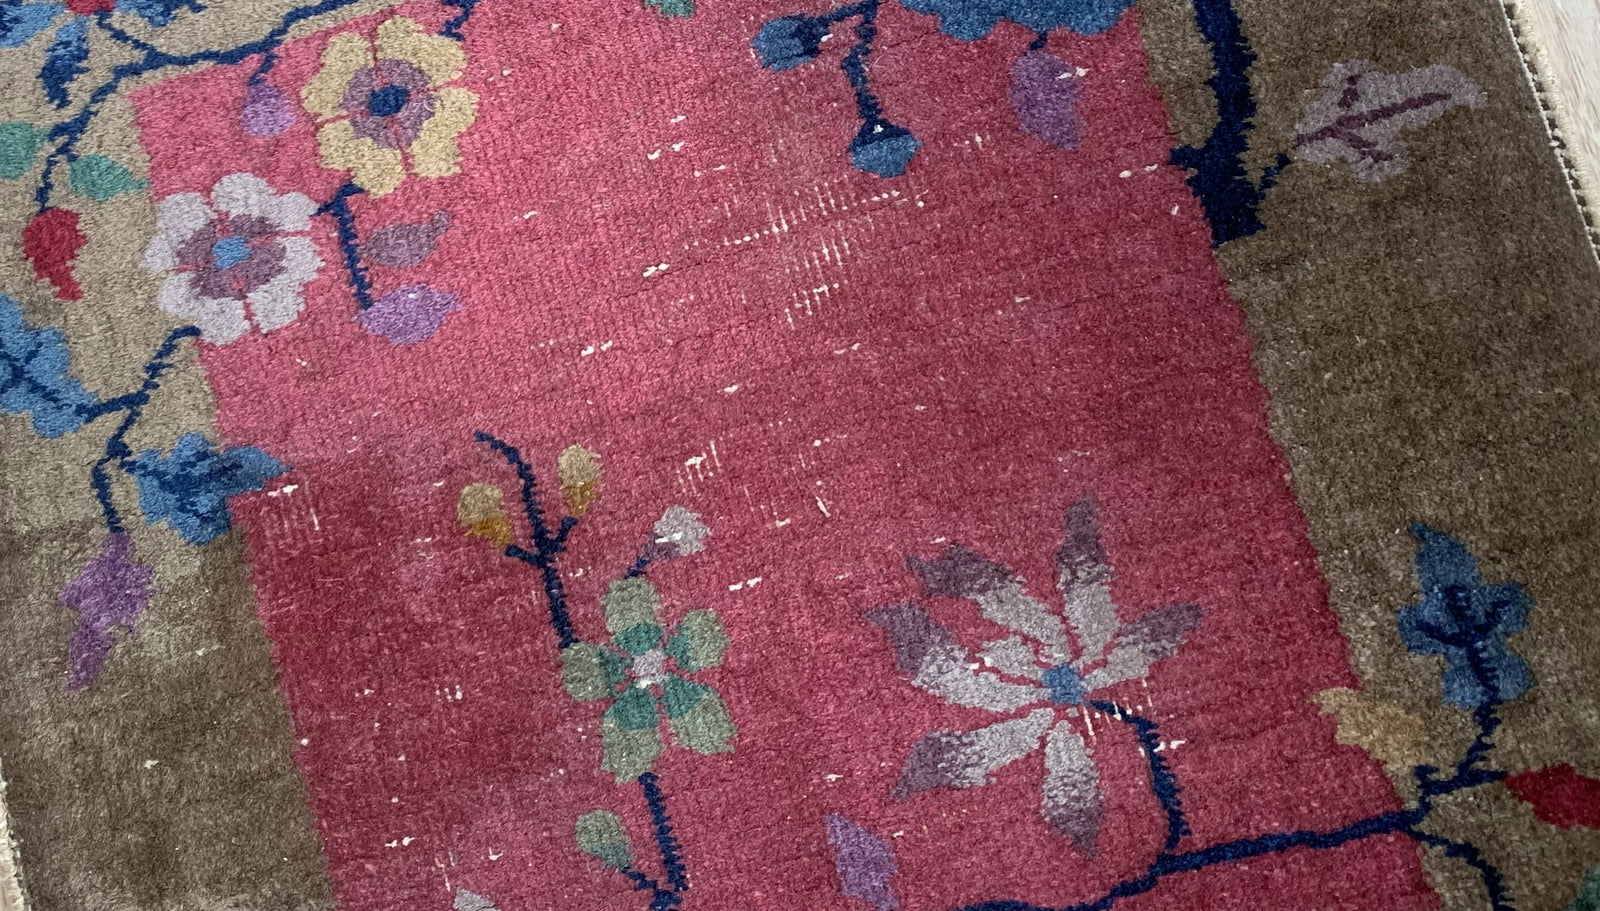 Detailed view of handmade woolen rug from China with fuchsia, blue, olive, purple, and yellow colors.